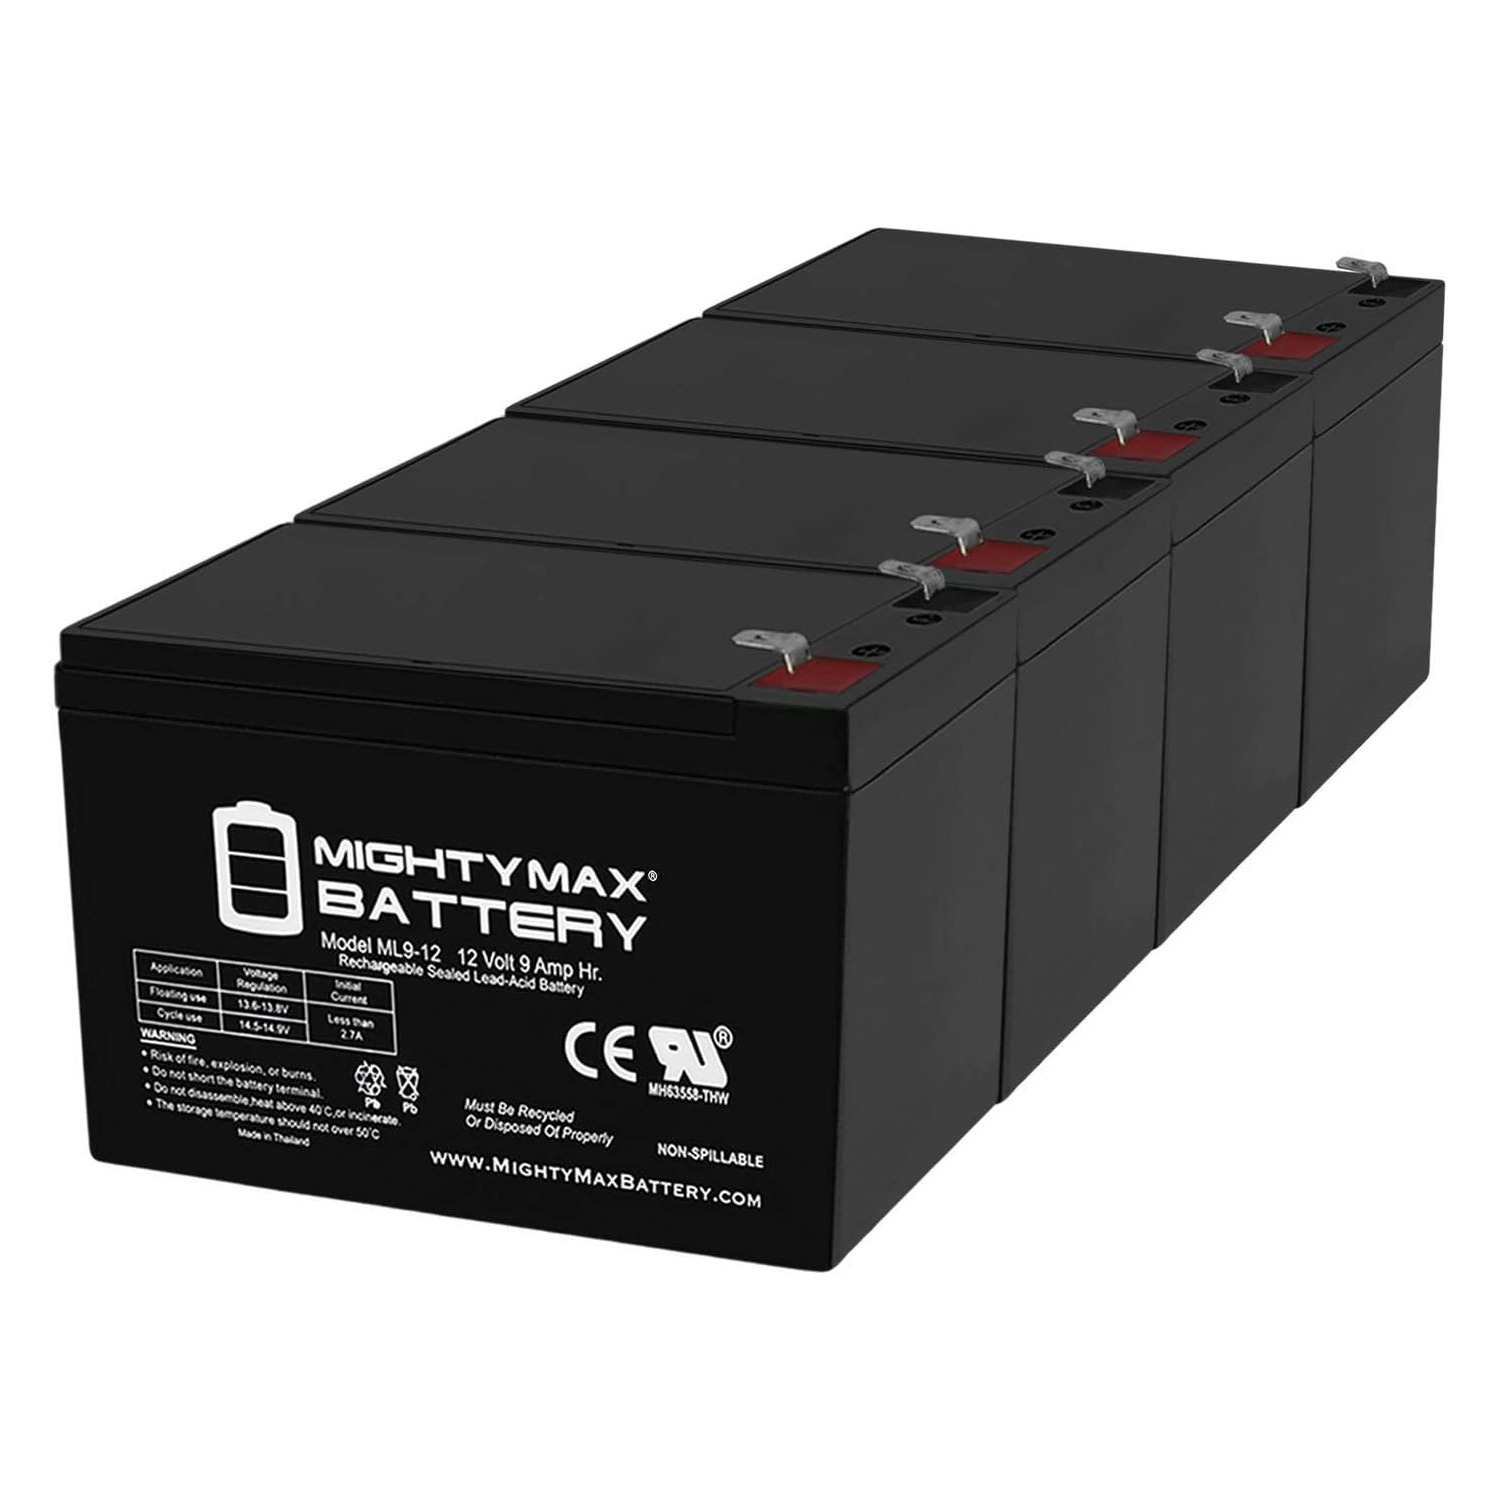 Altronix SMP5PMCTXPD16 12V, 9Ah Lead Acid Battery - 4 Pack